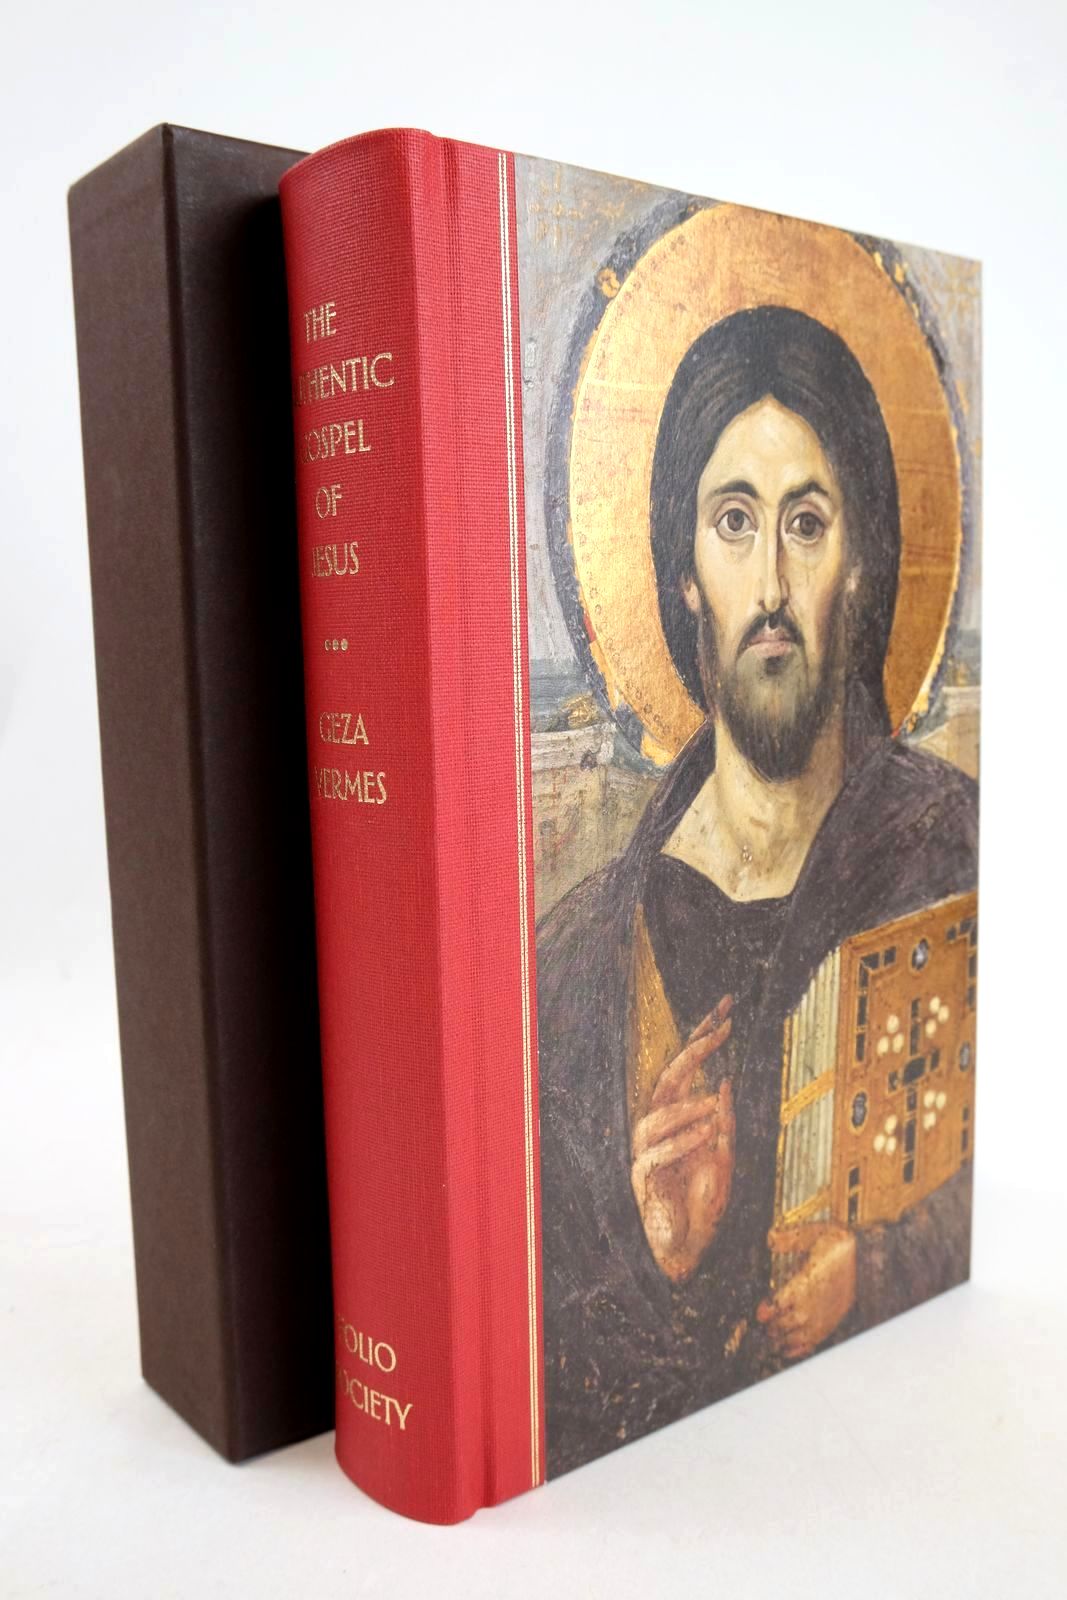 Photo of THE  AUTHENTIC GOSPEL OF JESUS written by Vermes, Geza published by Folio Society (STOCK CODE: 1327602)  for sale by Stella & Rose's Books